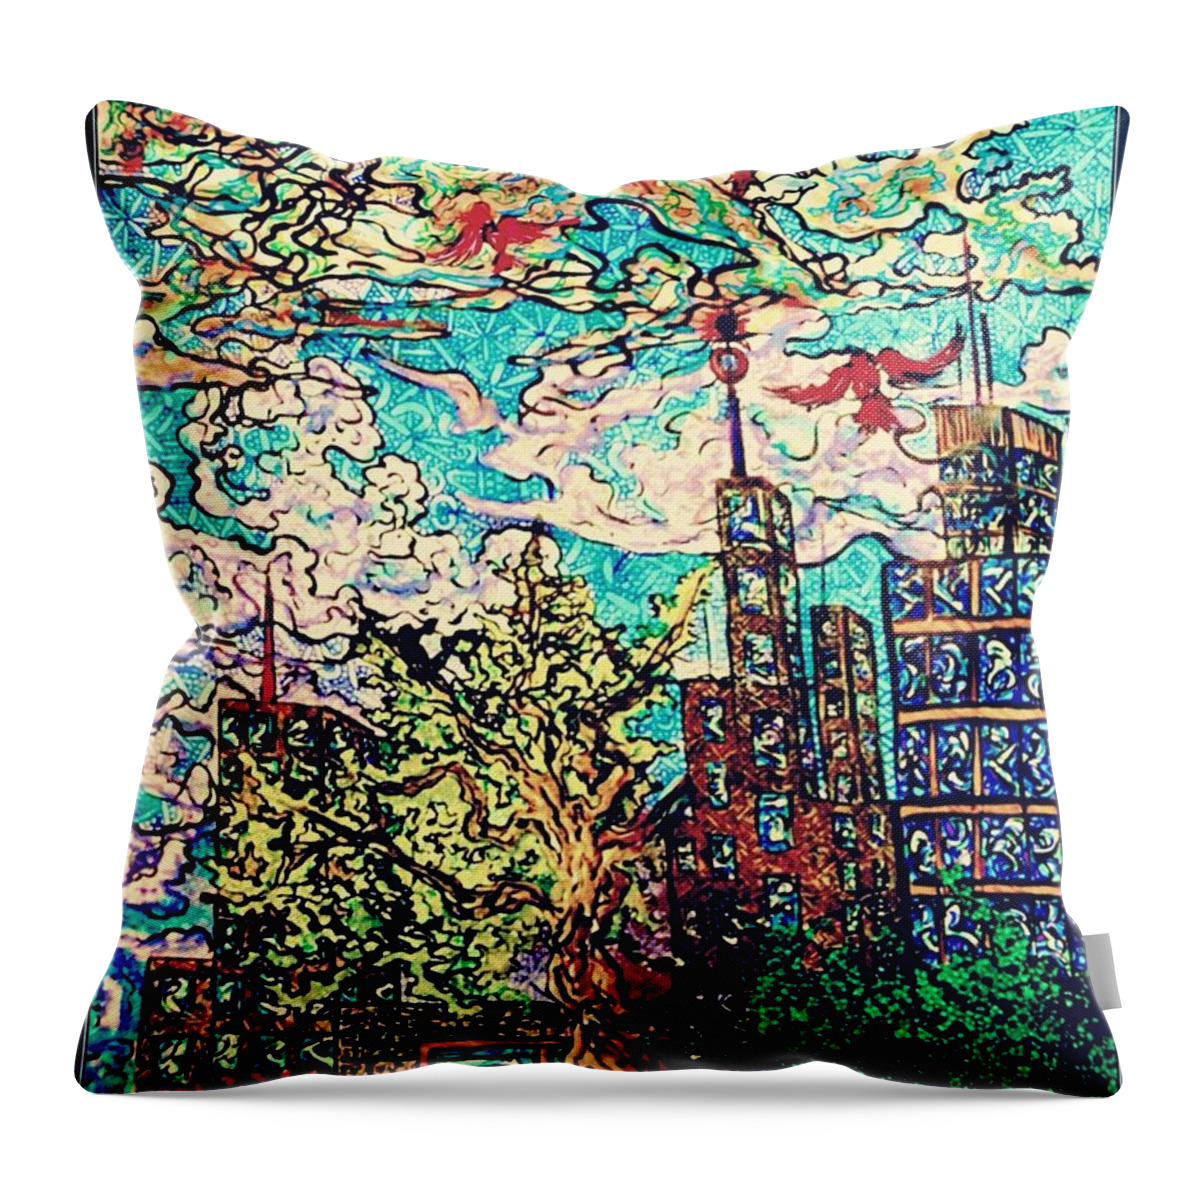 Cityscape Throw Pillow featuring the drawing The City by Angela Weddle